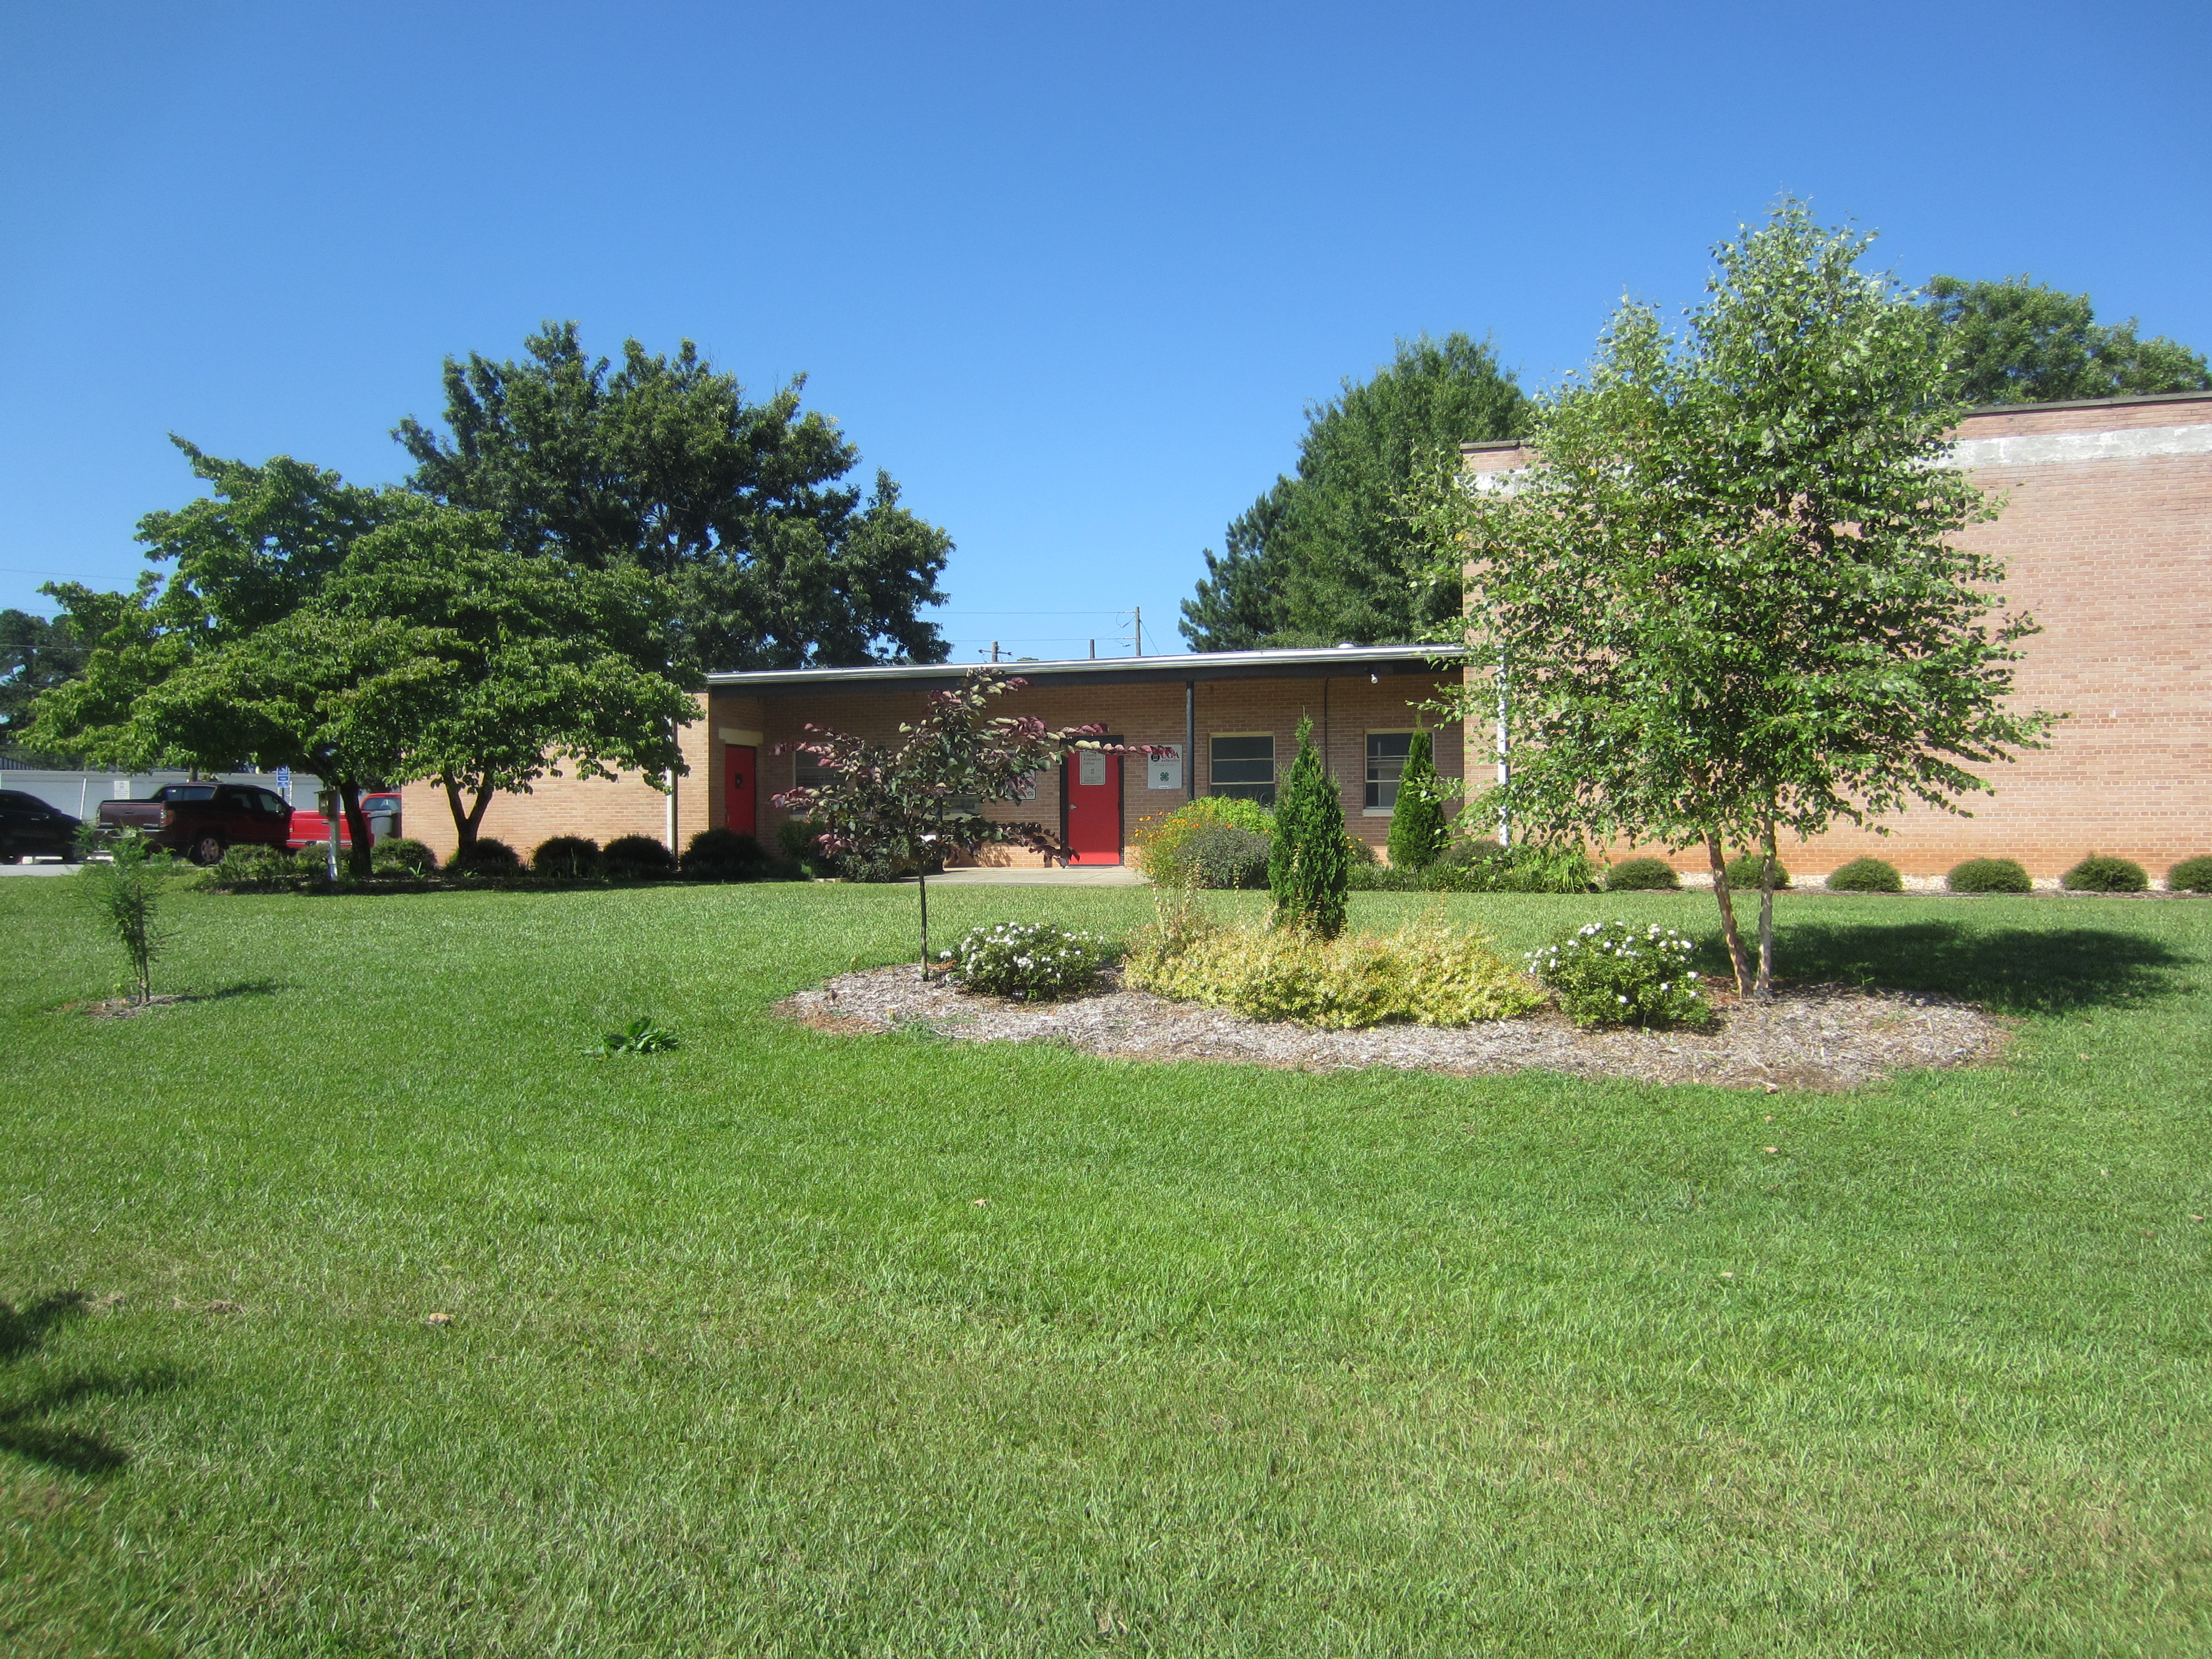 Putnam County Extension office building